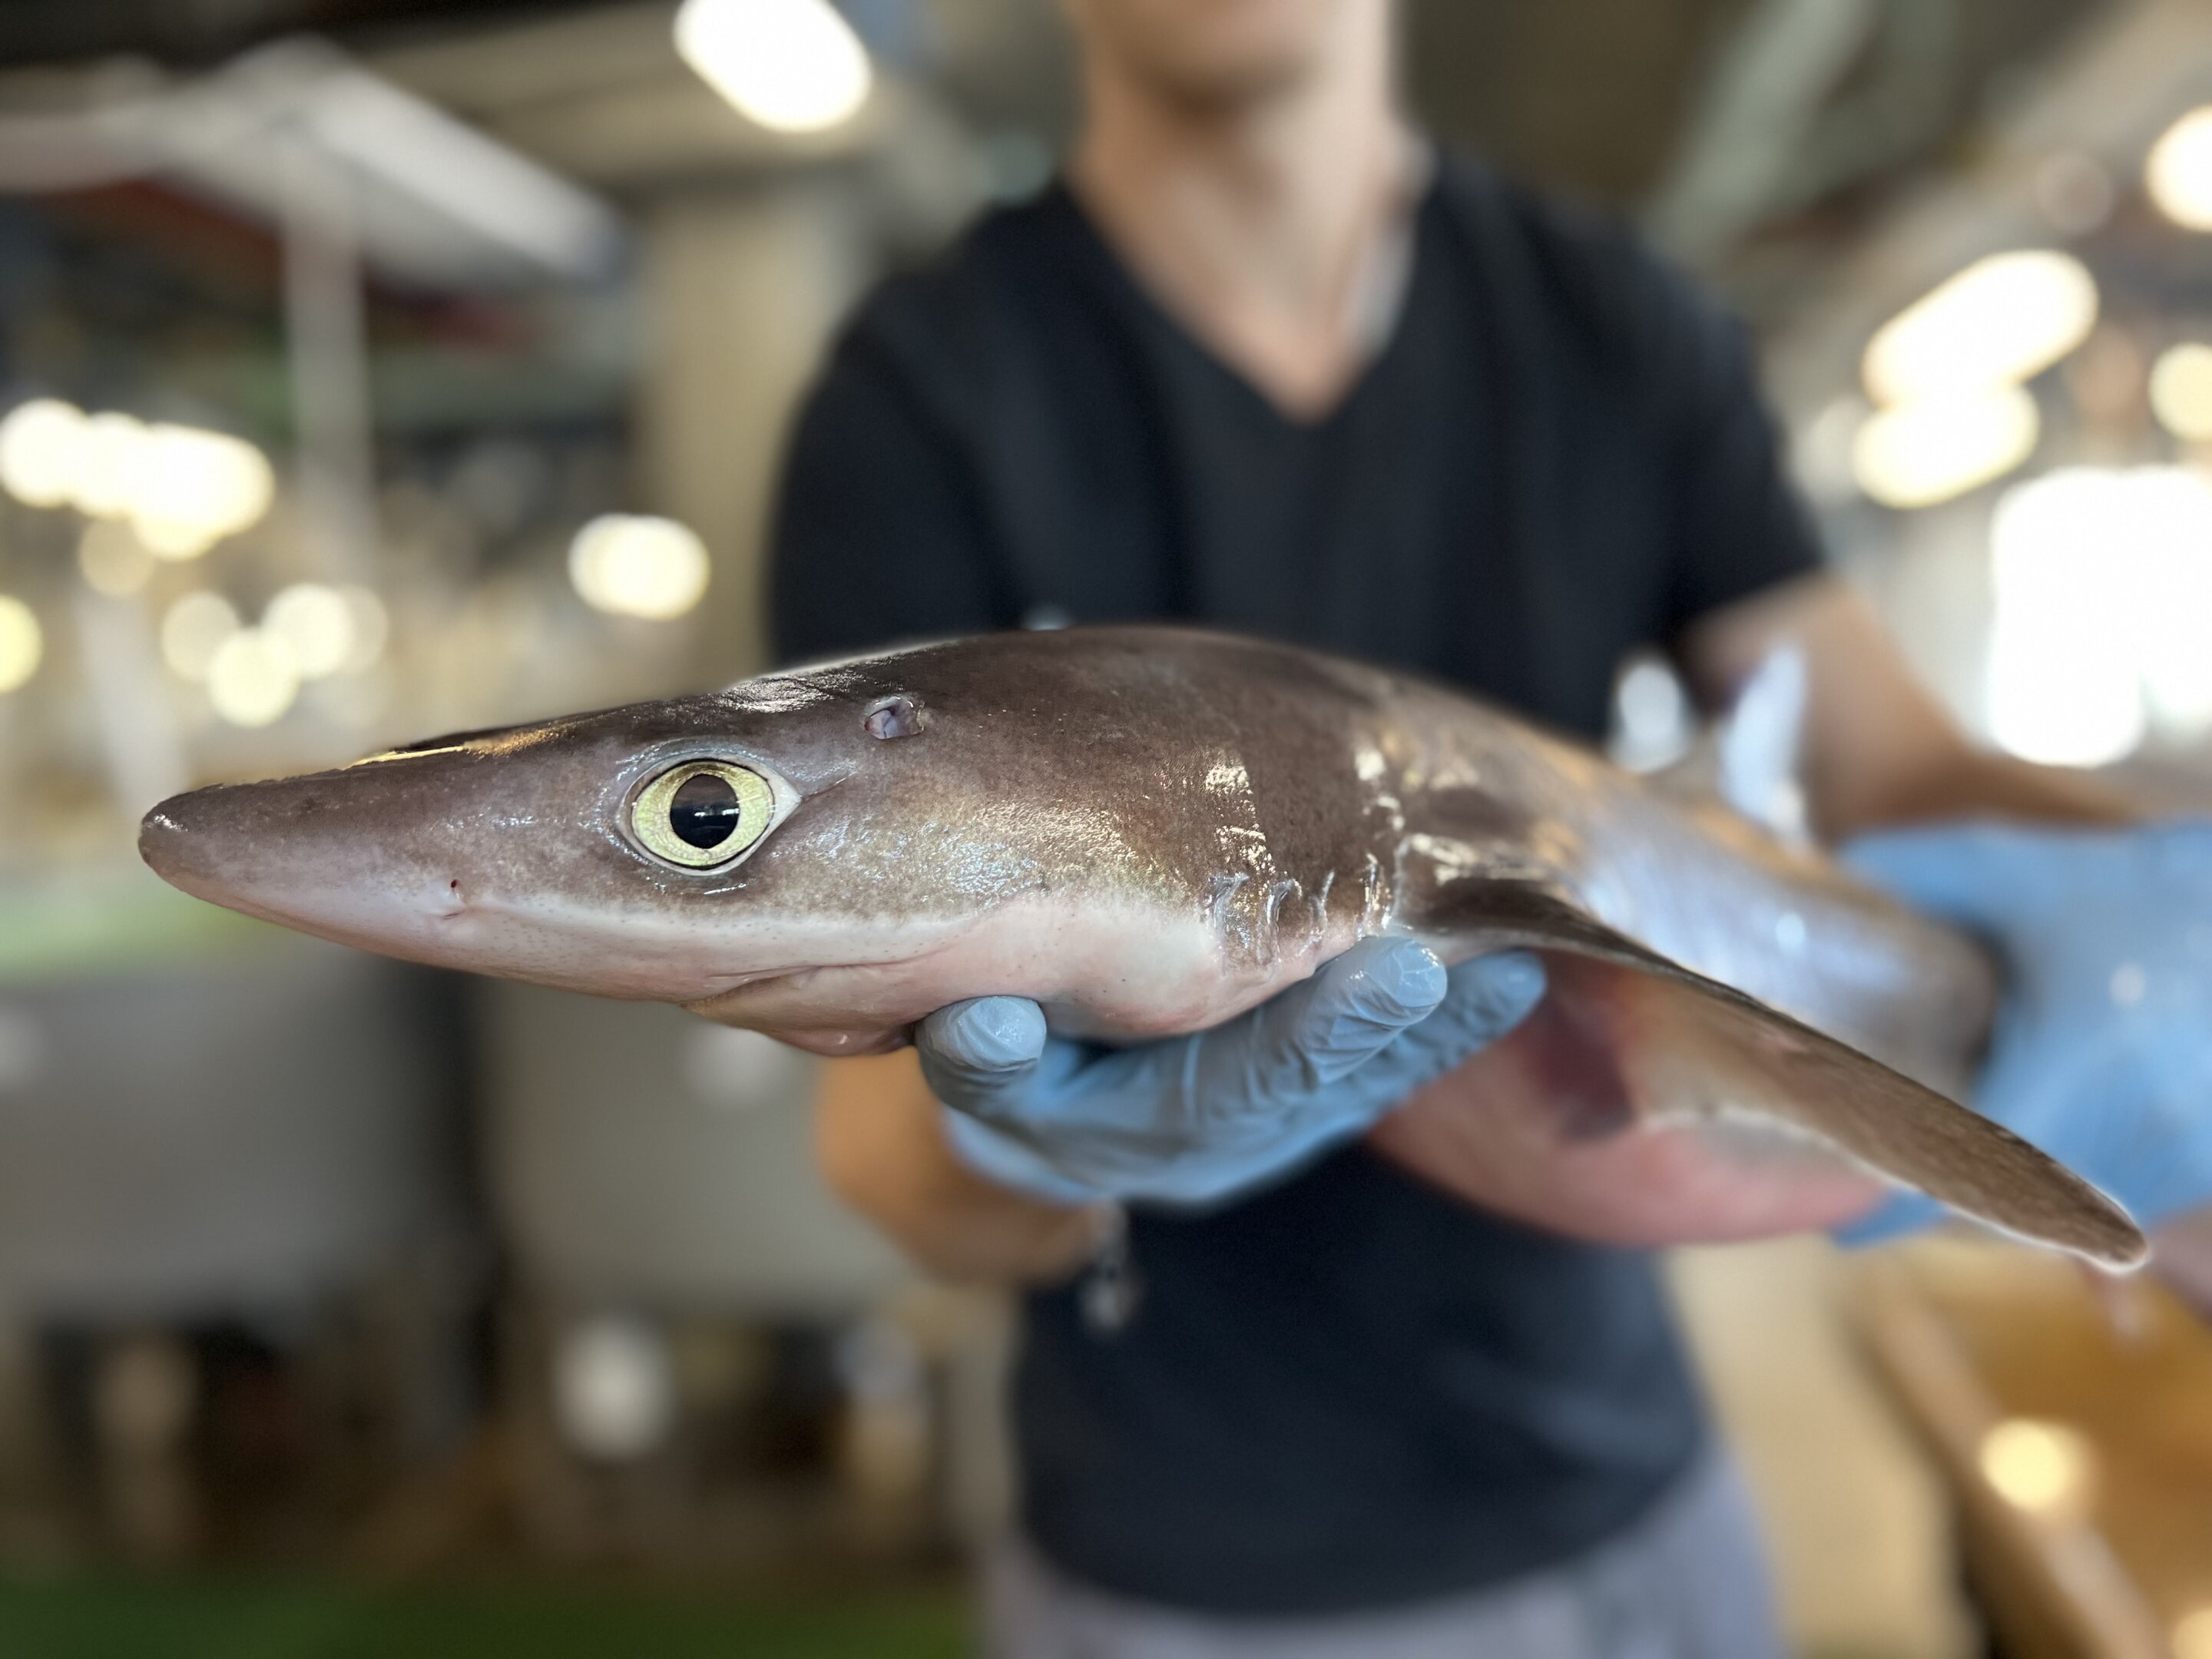 Looking sharp: Shark skin is unique and may have medical use, too